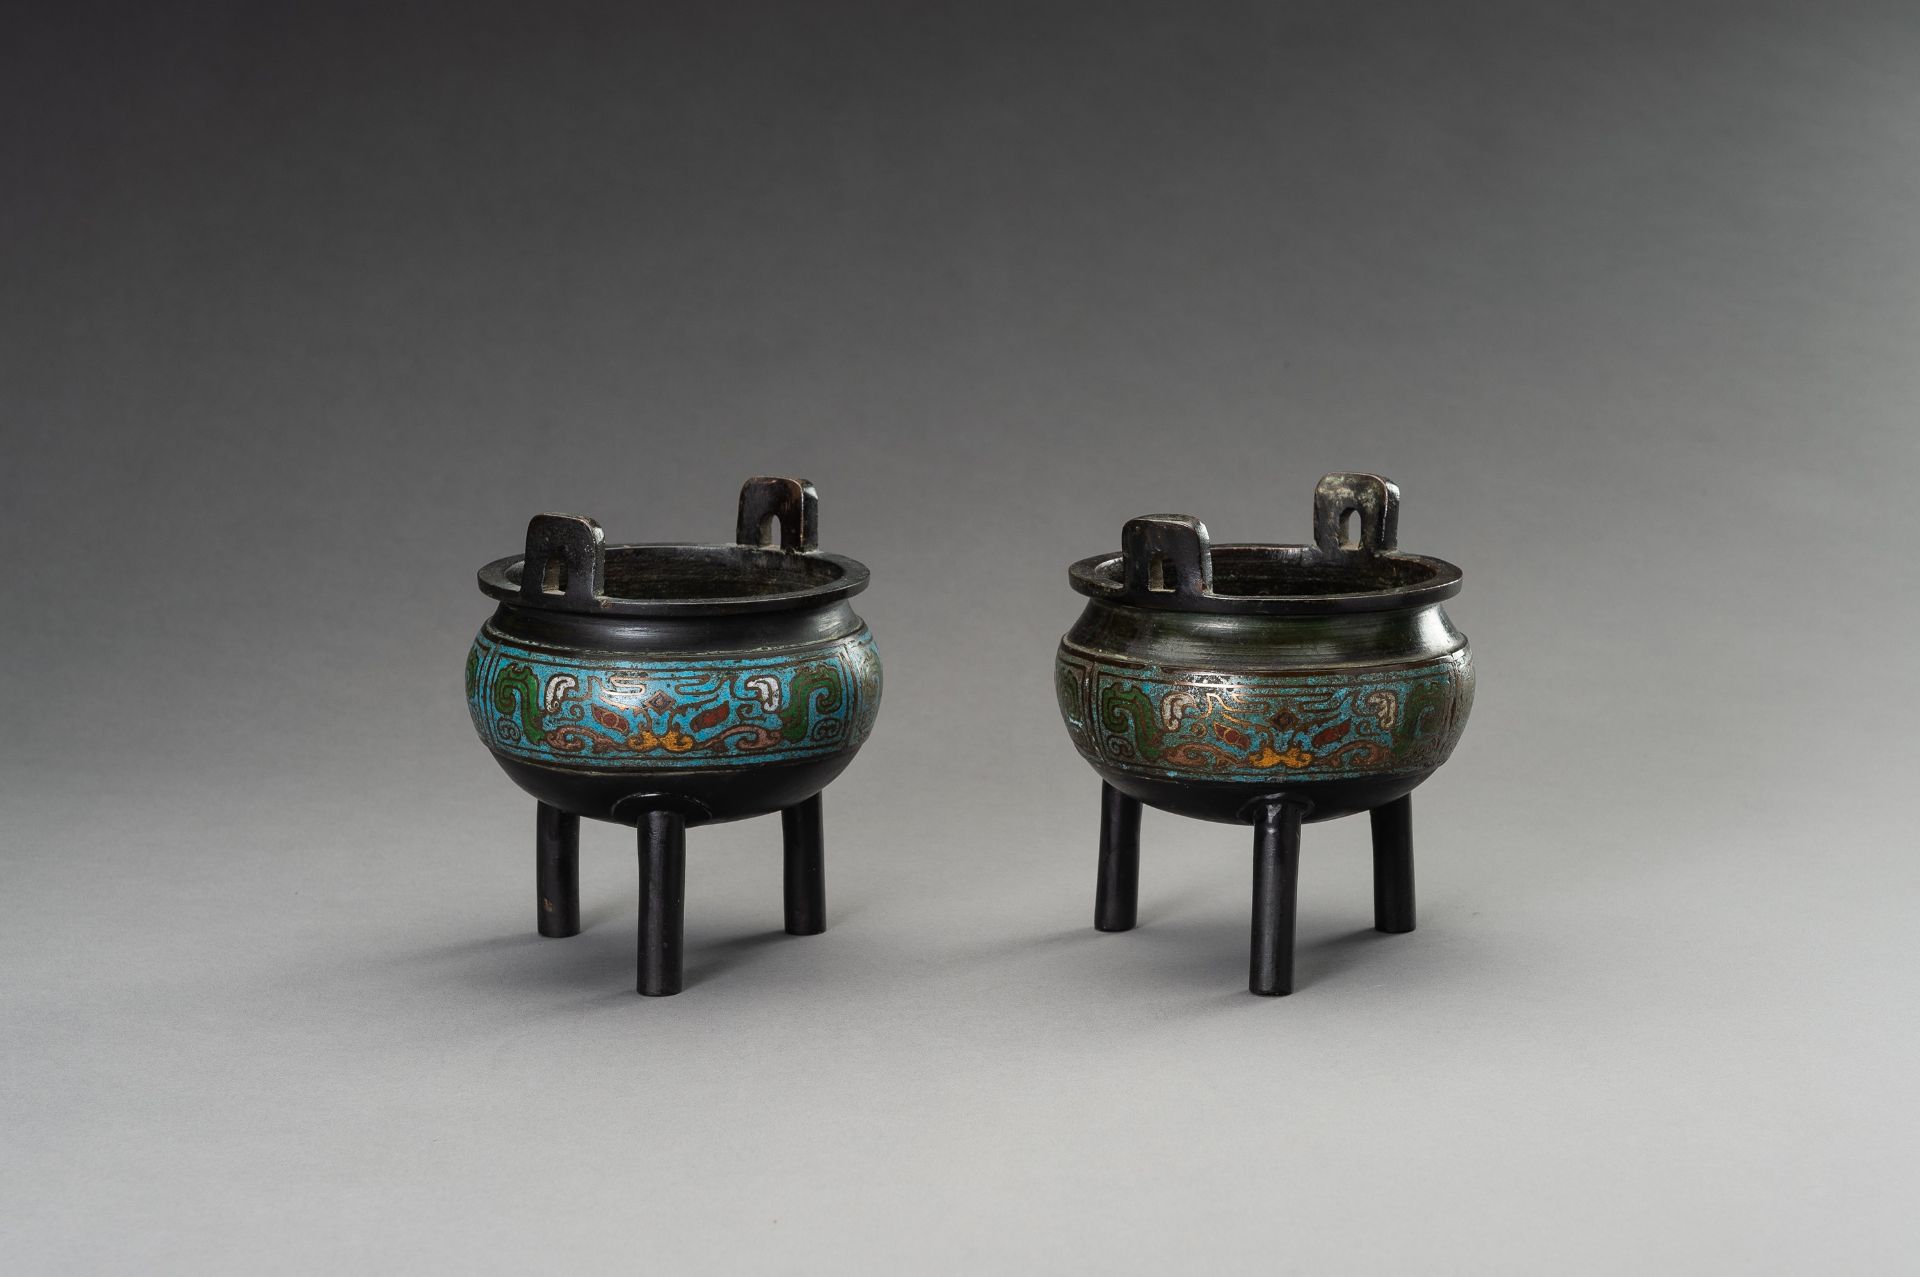 A PAIR OF CHAMPLEVE ENAMEL BRONZE TRIPOD CENSERS, QING DYNASTY - Image 3 of 9